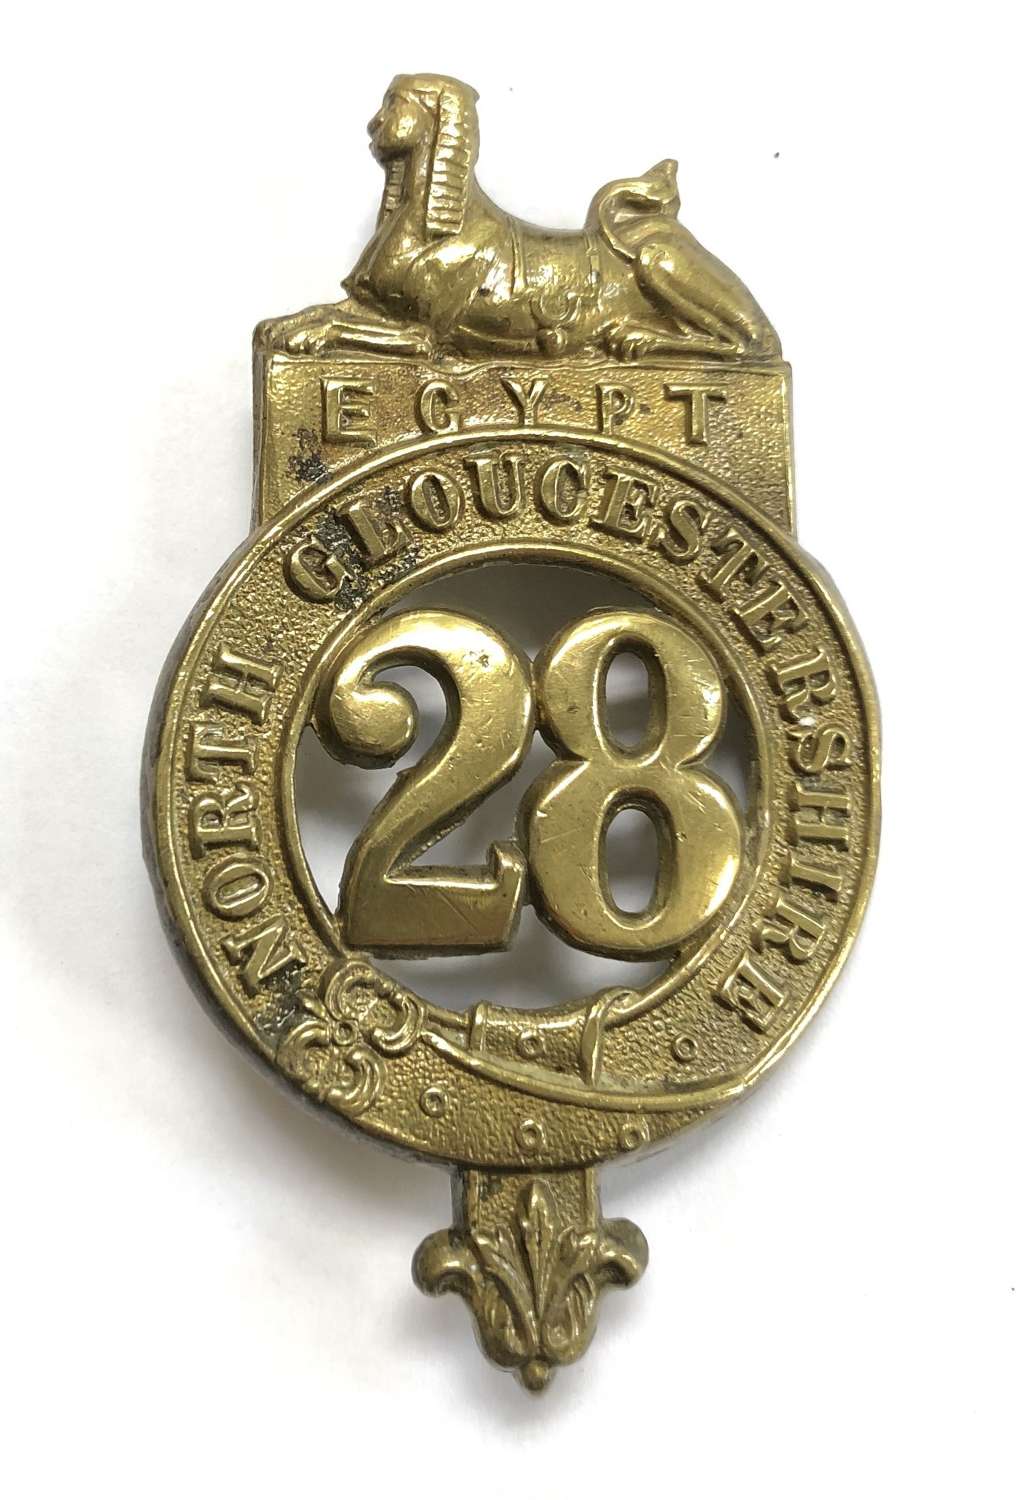 28th (North Gloucestershire) Foot Victorian OR’s glengarry badge